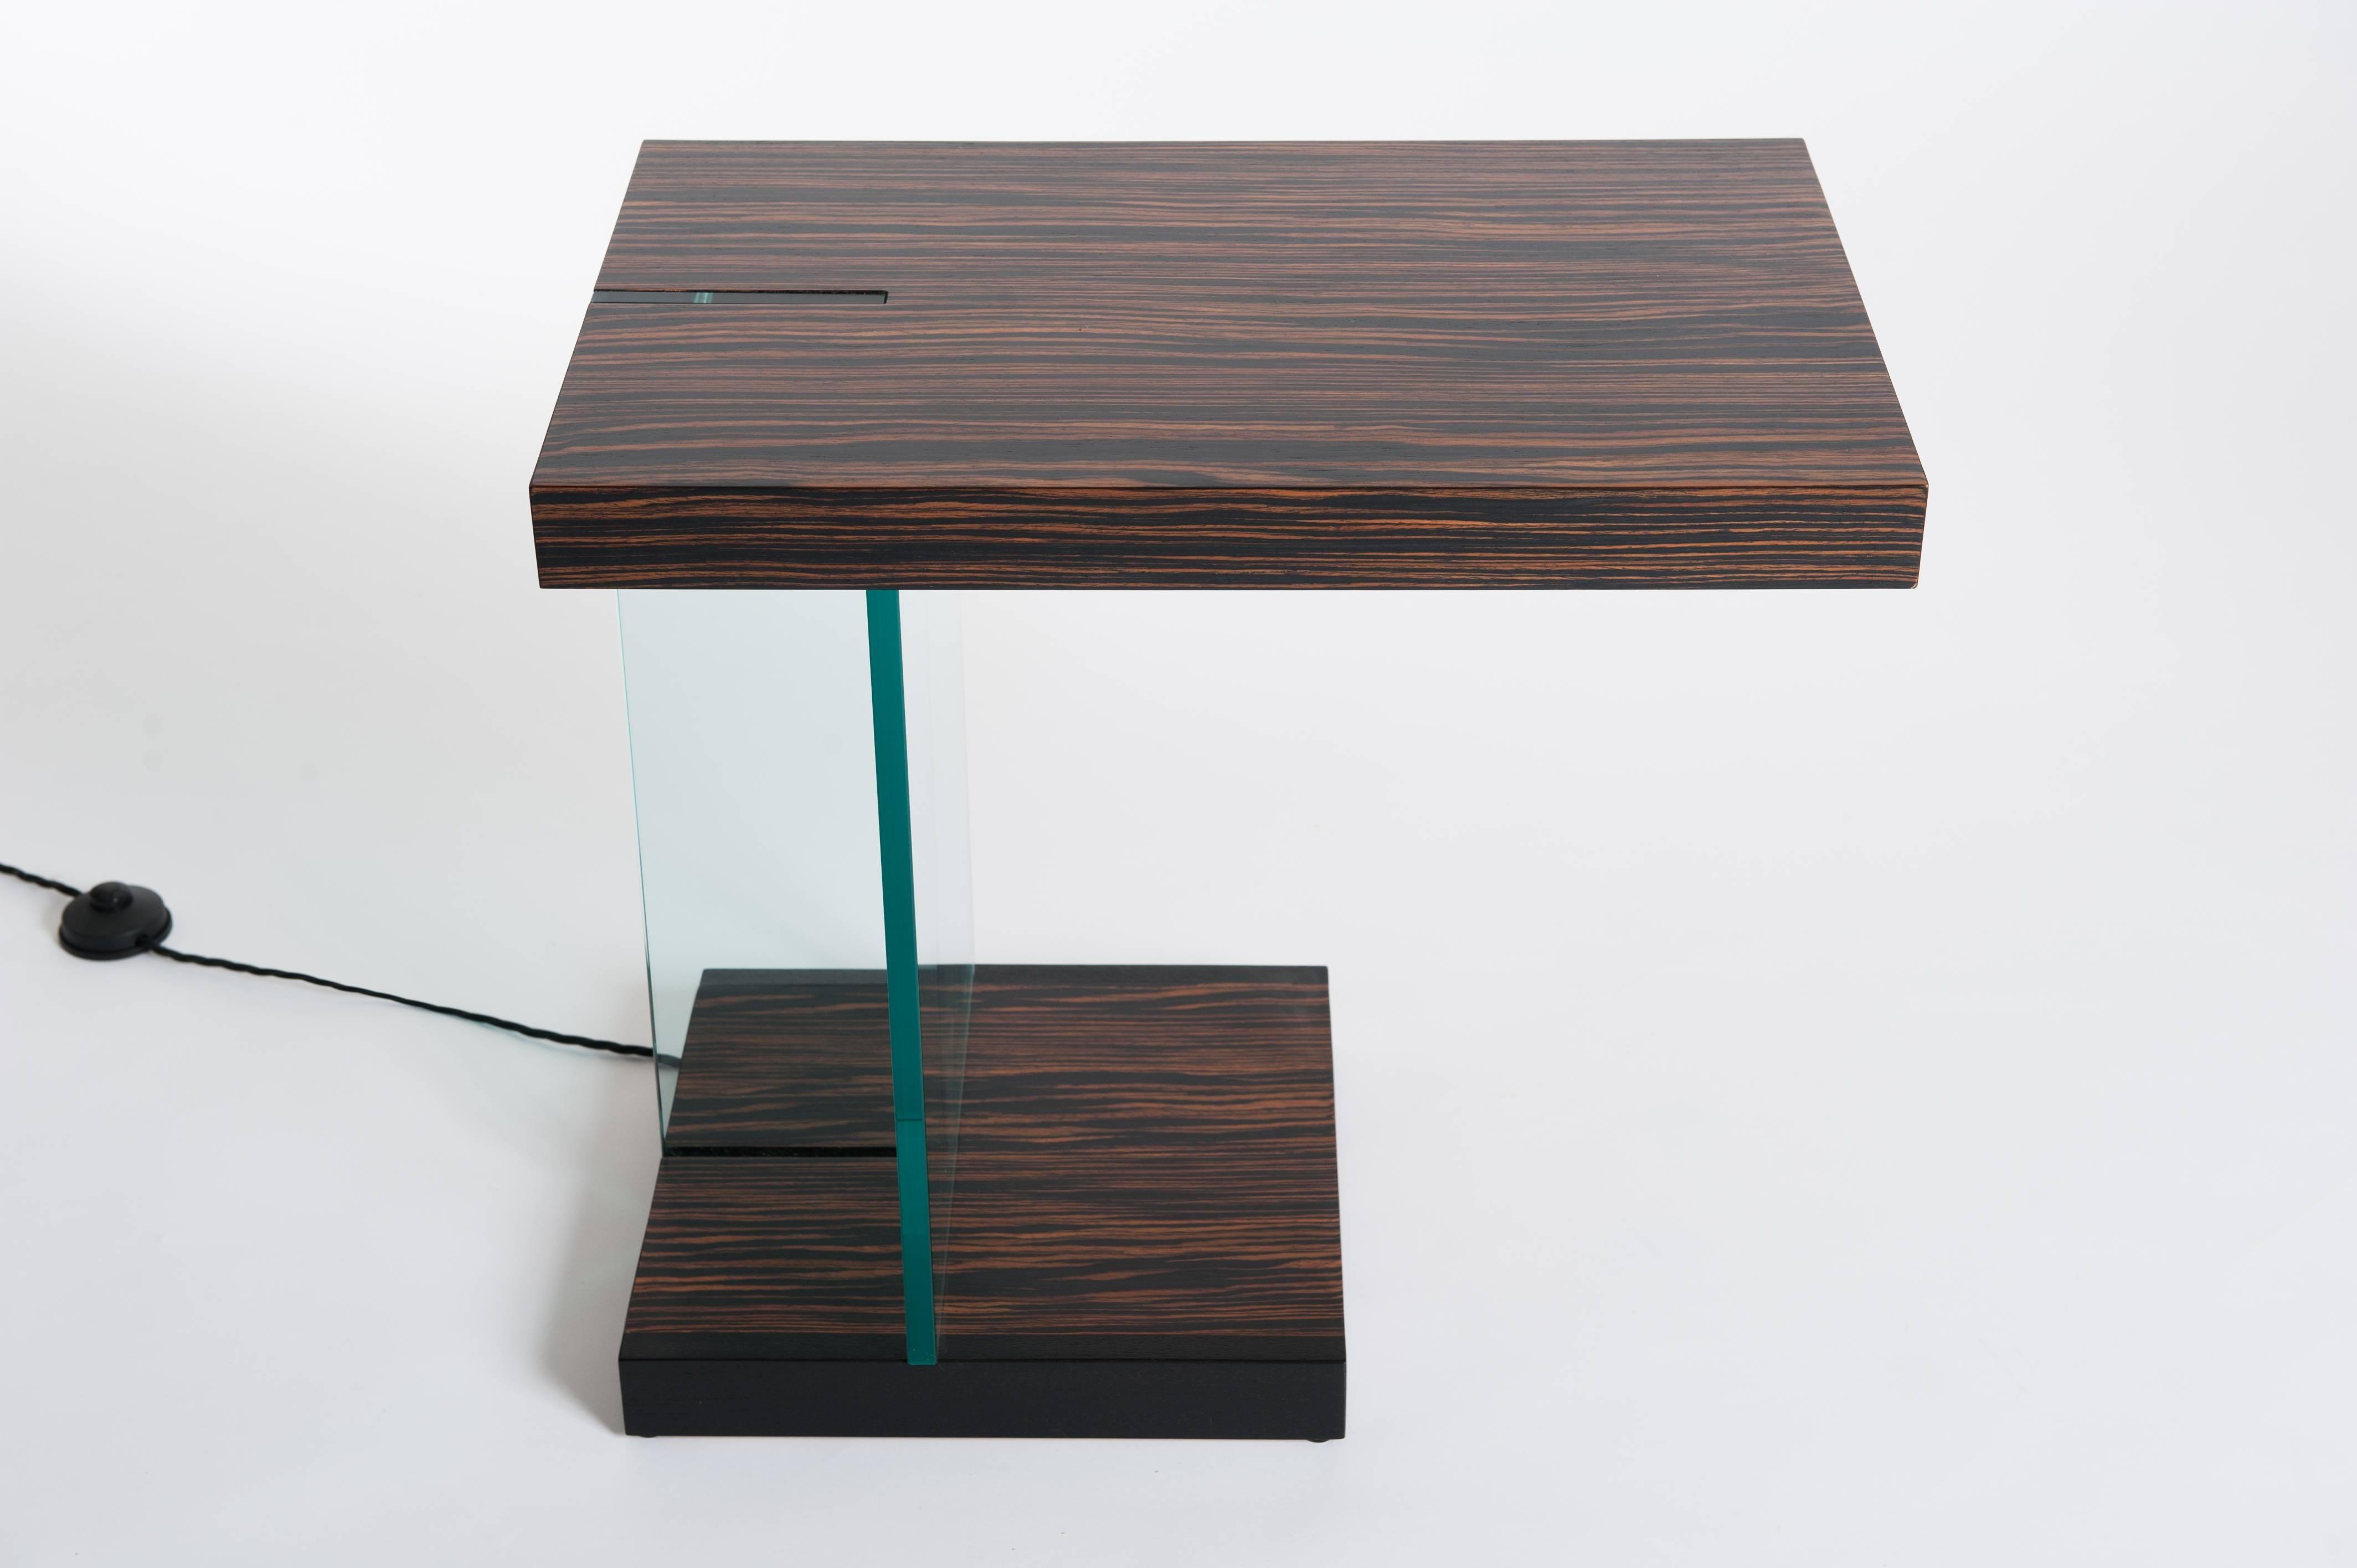 Extraordinary side table or coffee table Zebrawood Veneer and Fontana Arte
glass support. Geometrically shaped design, the glass part can be illuminated
by pressing the foot button.